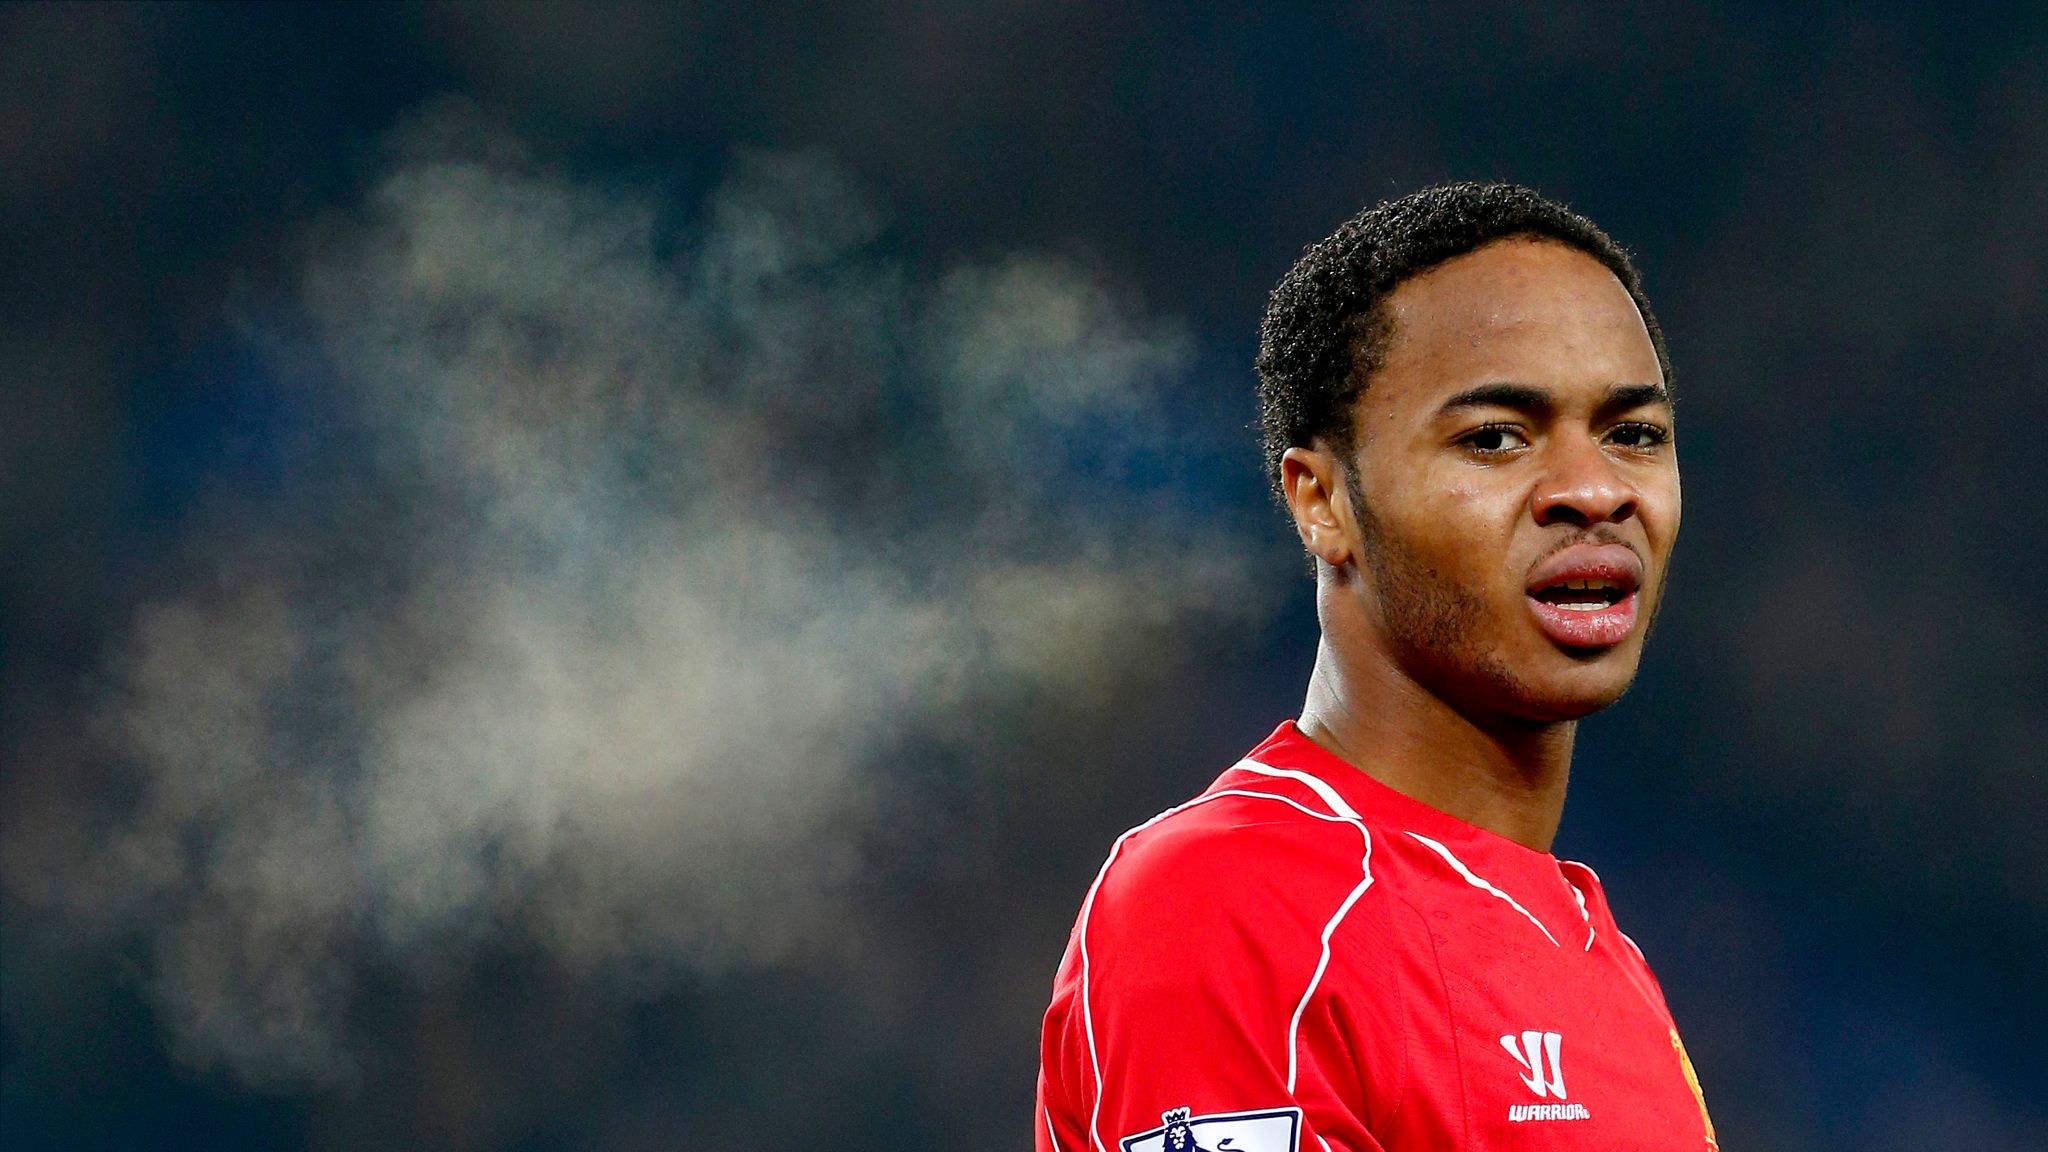 Manchester City to step up Raheem Sterling contract renewal